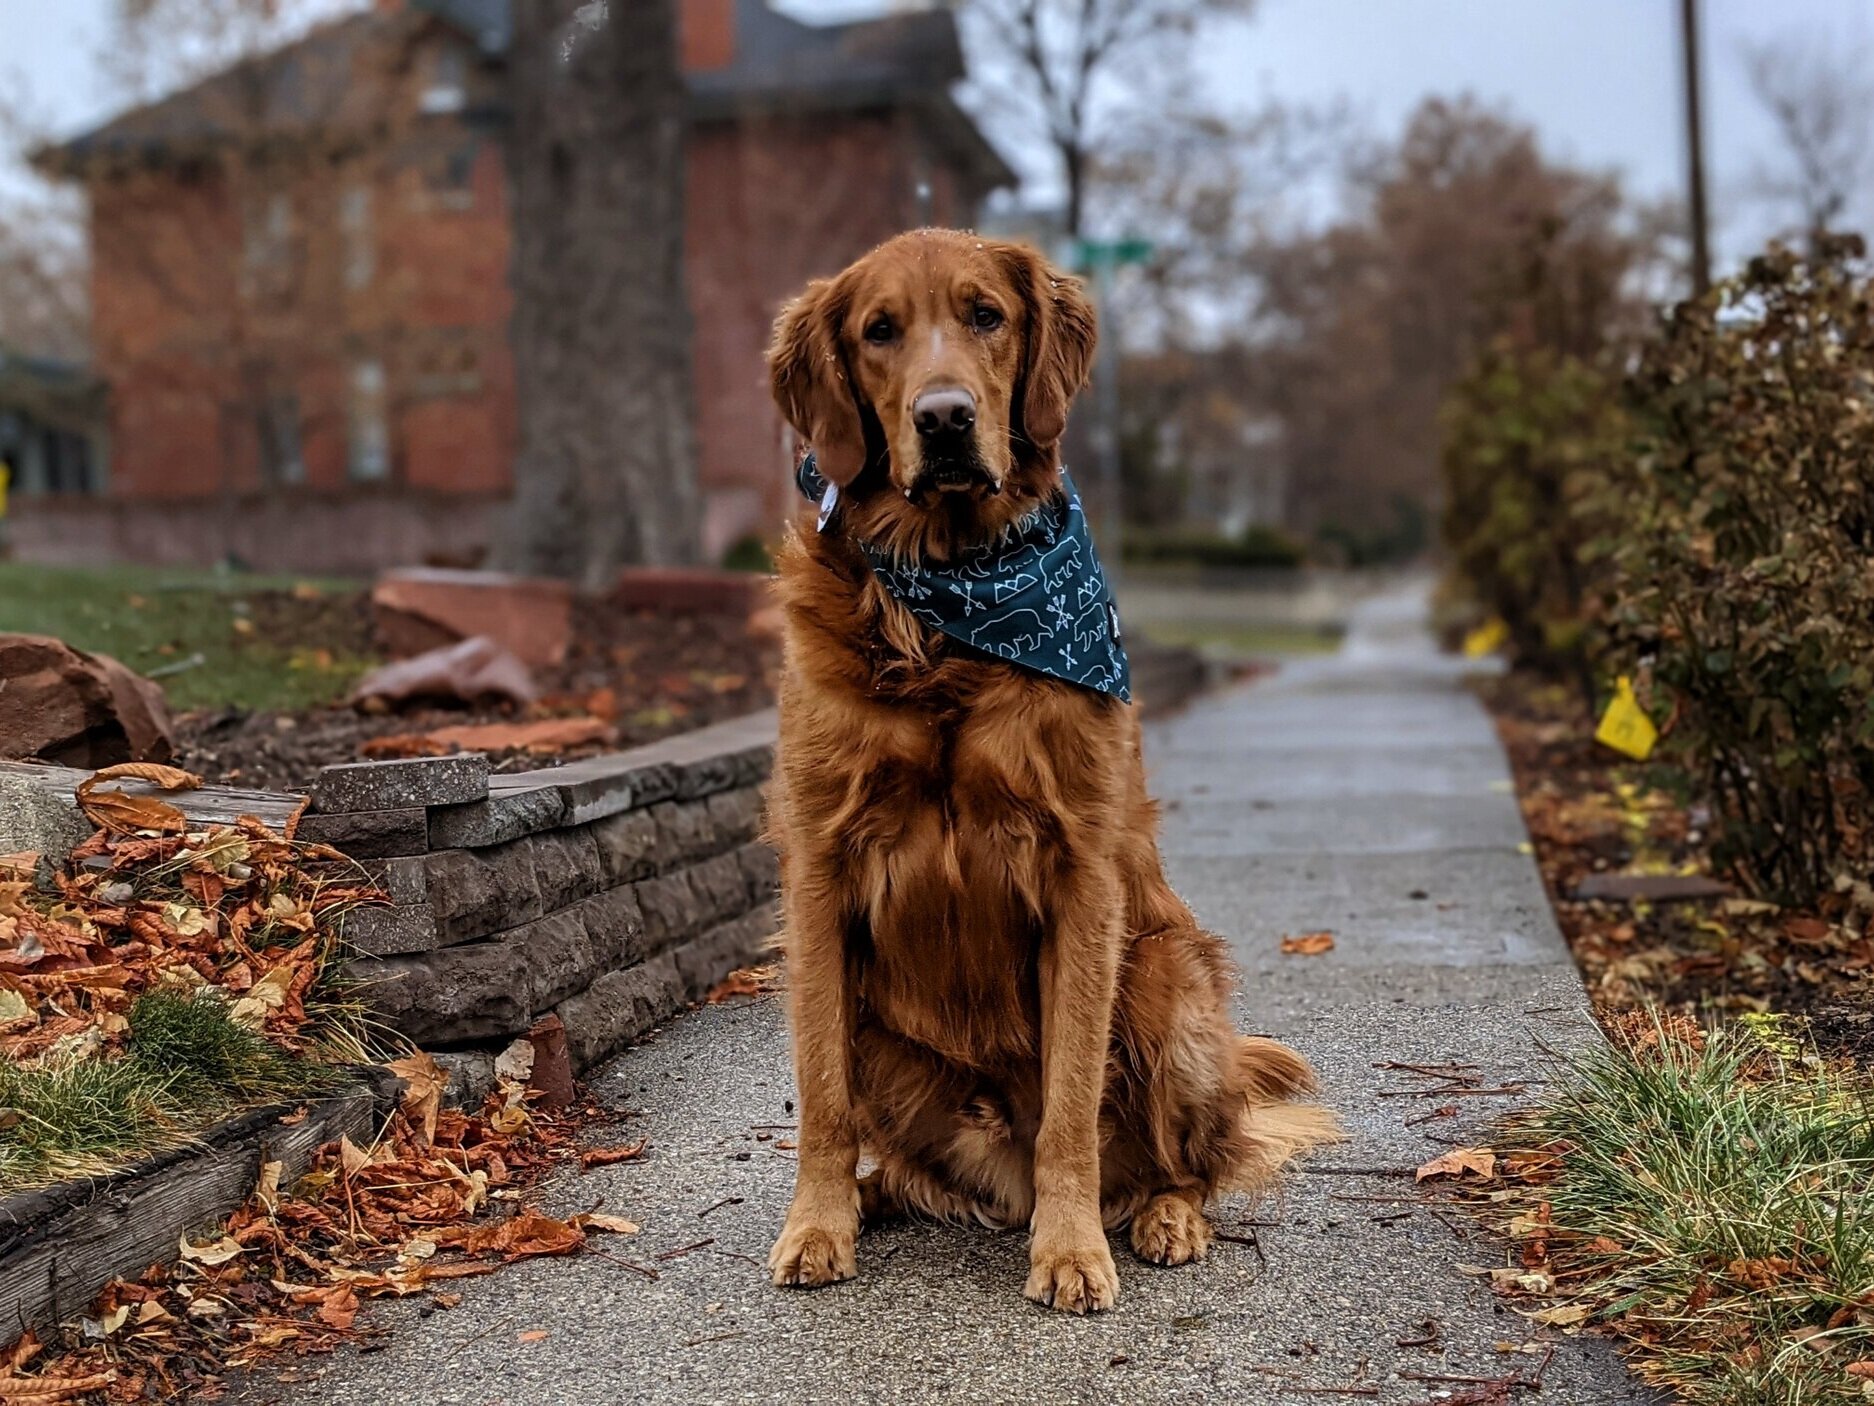 Golden retriever Scout sits on a sidewalk on a gloomy fall day. He is wearing a teal bandana with bears on it.